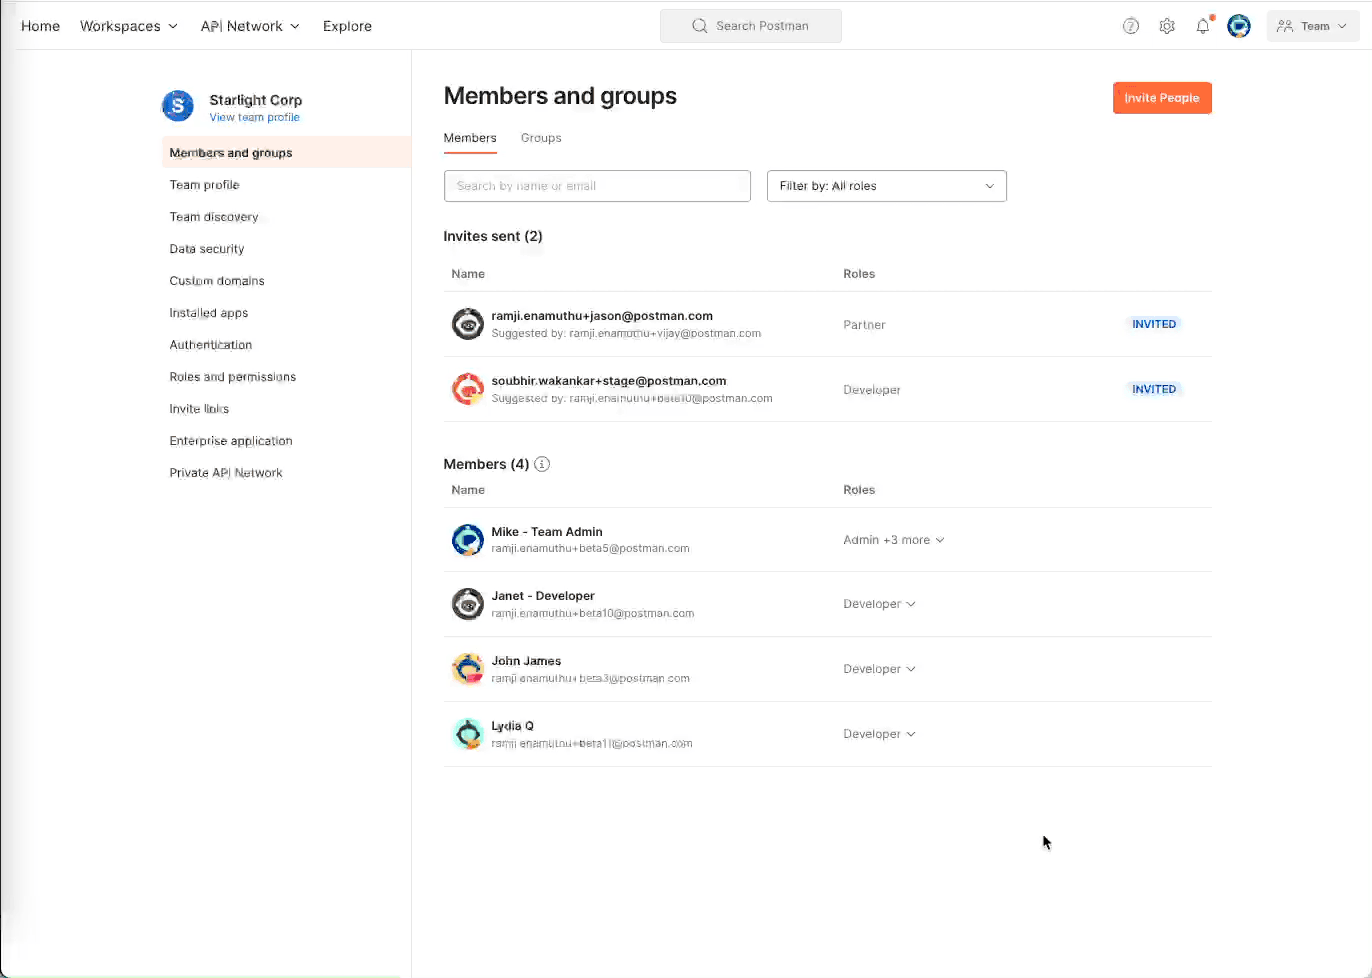 Assign a Partner Manager role for your team. GIF.